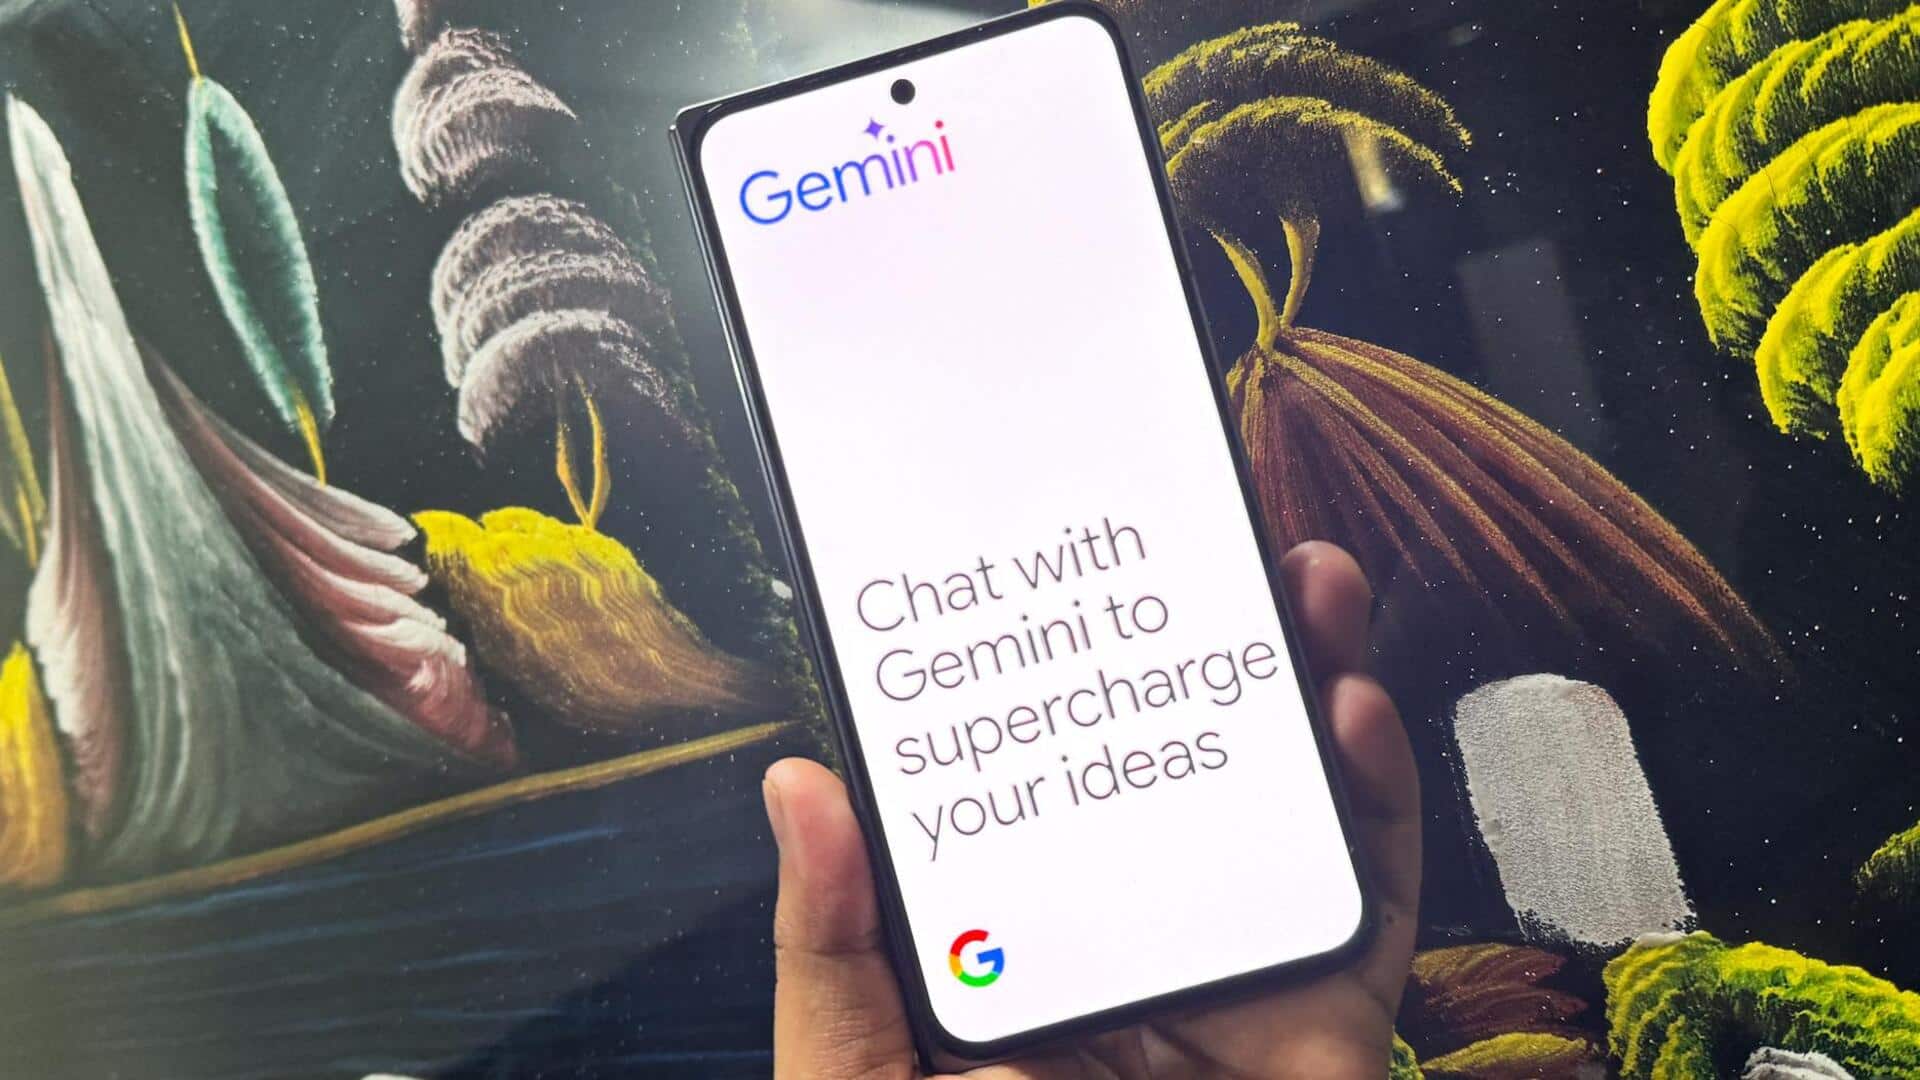 Google will soon incorporate Gemini chatbot into its Android app